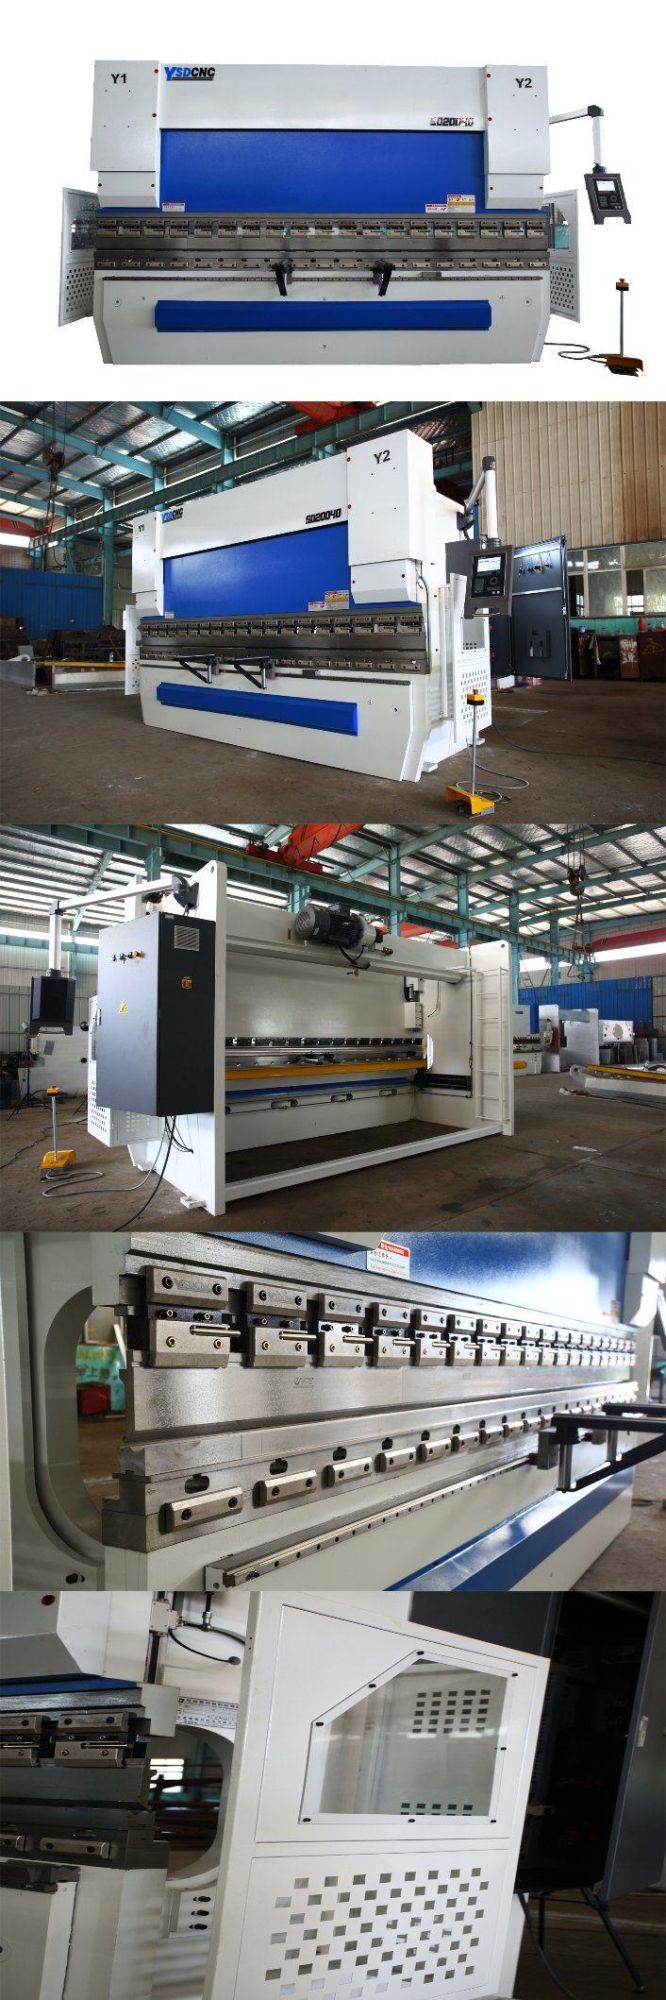 Hydraulic Plate Bending Machine with Da52s System 4+1 Axis